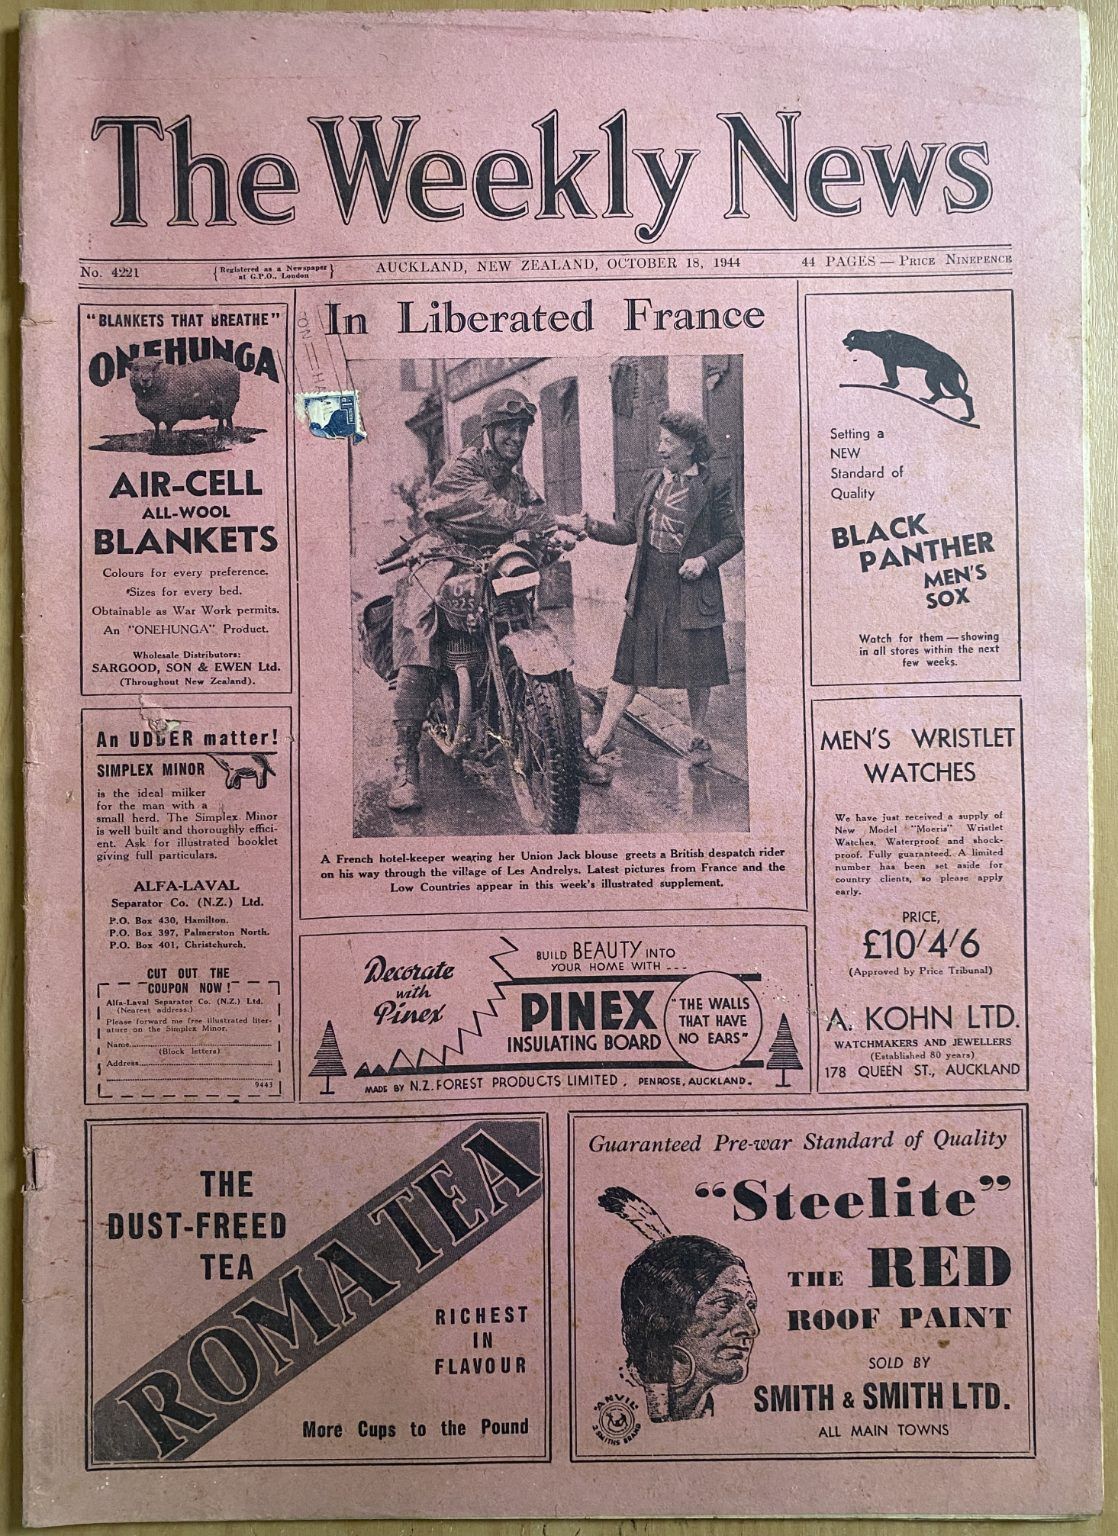 OLD NEWSPAPER: The Weekly News - No. 4221, 18 October 1944